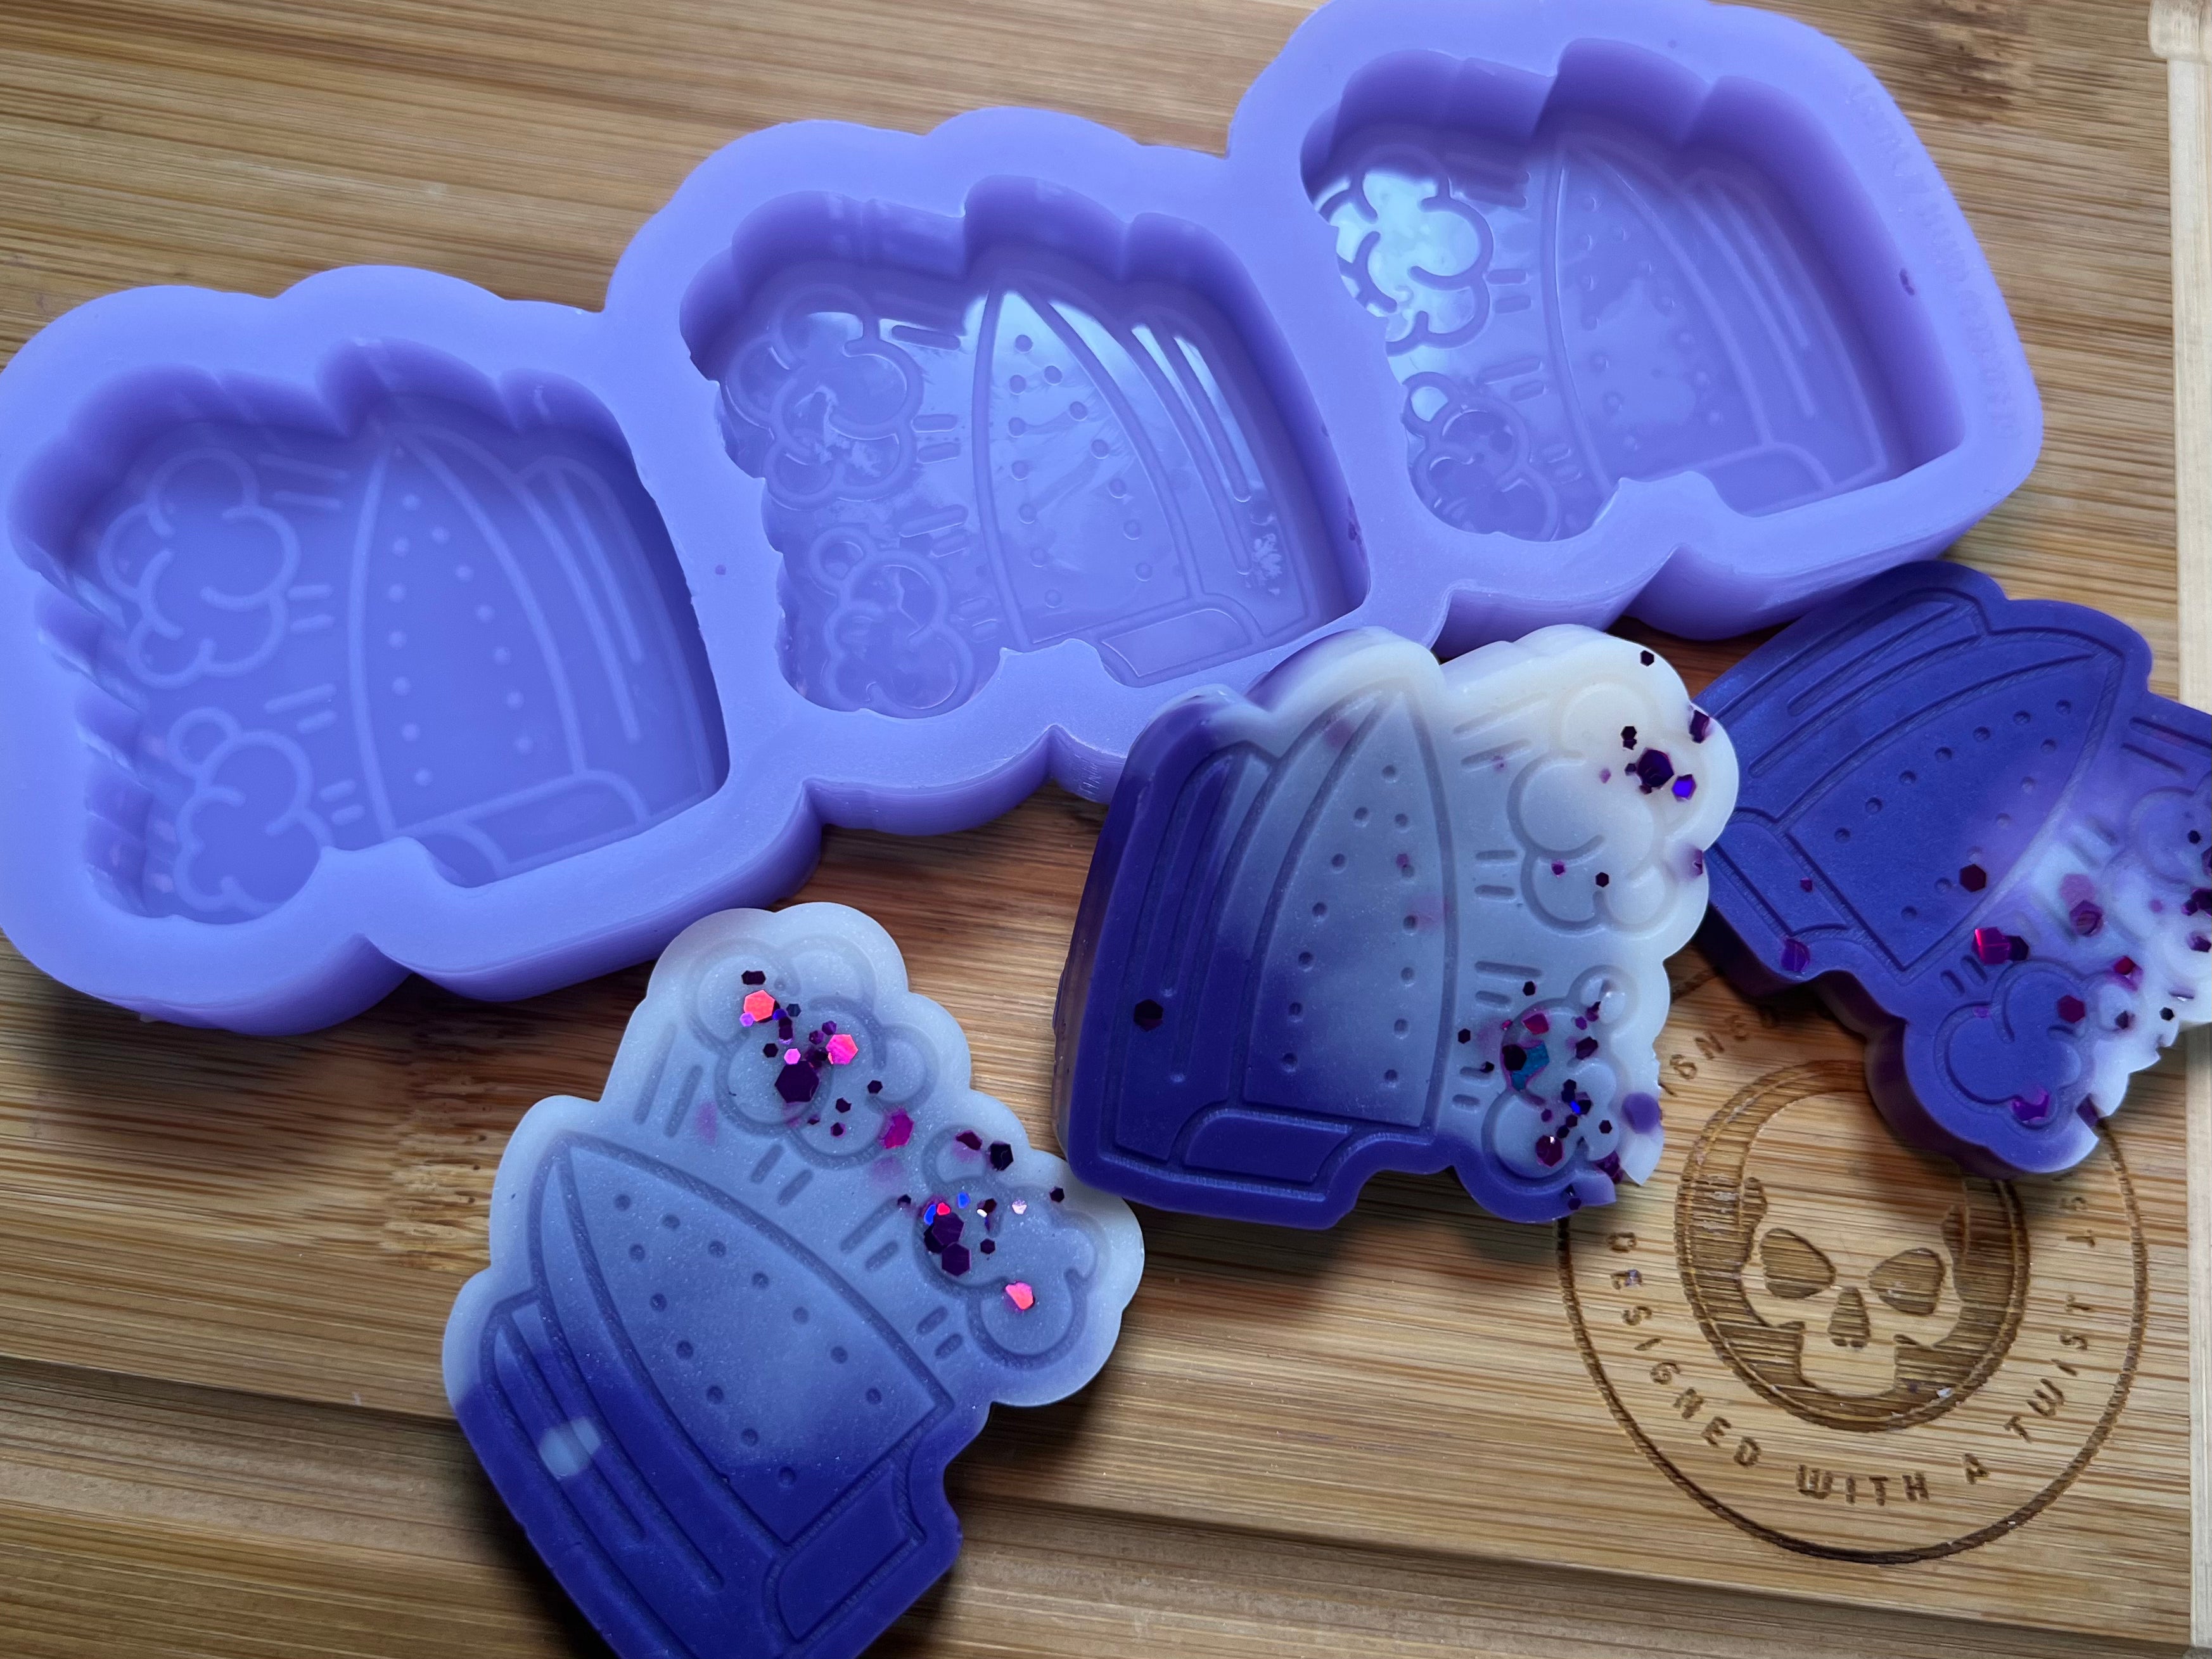 Iron Wax Melt Silicone Mold - Designed with a Twist  - Top quality silicone molds made in the UK.